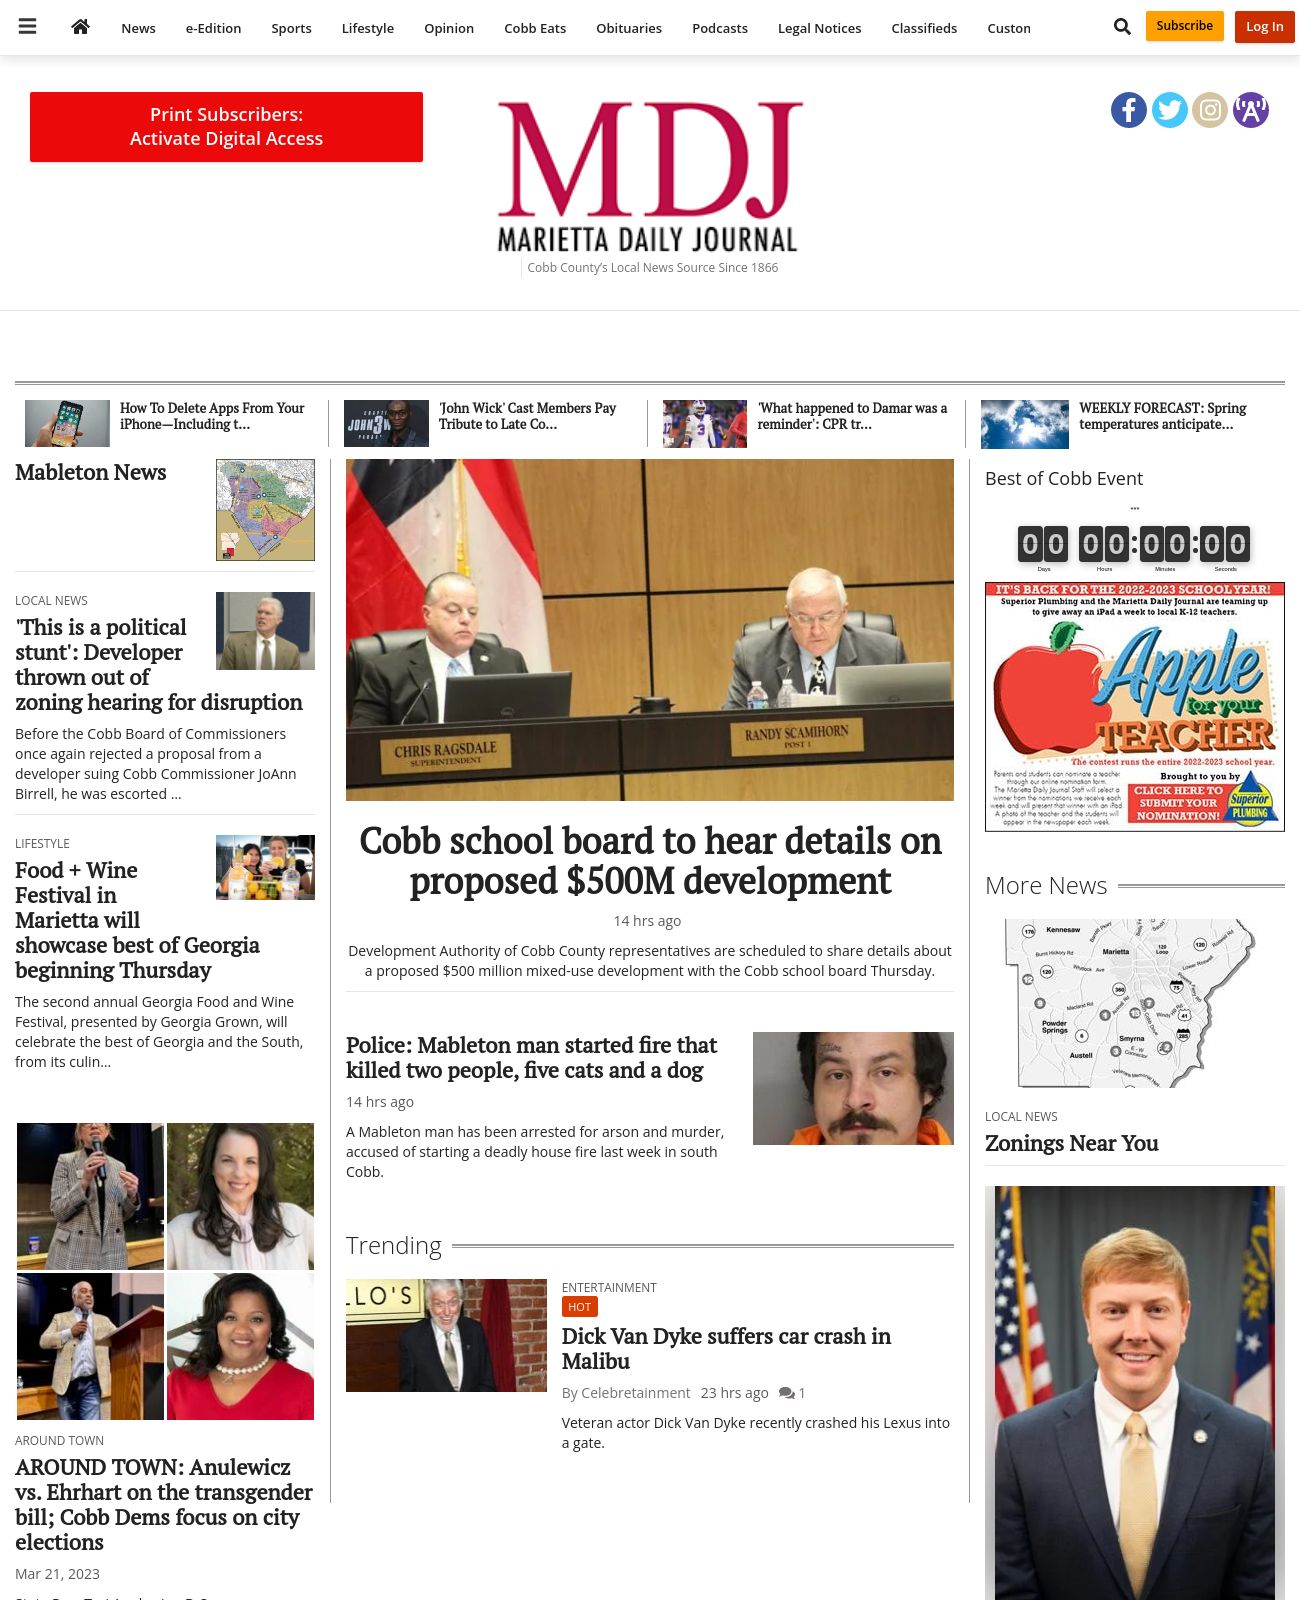 Marietta Daily Journal at 2023-03-23 10:10:52-04:00 local time